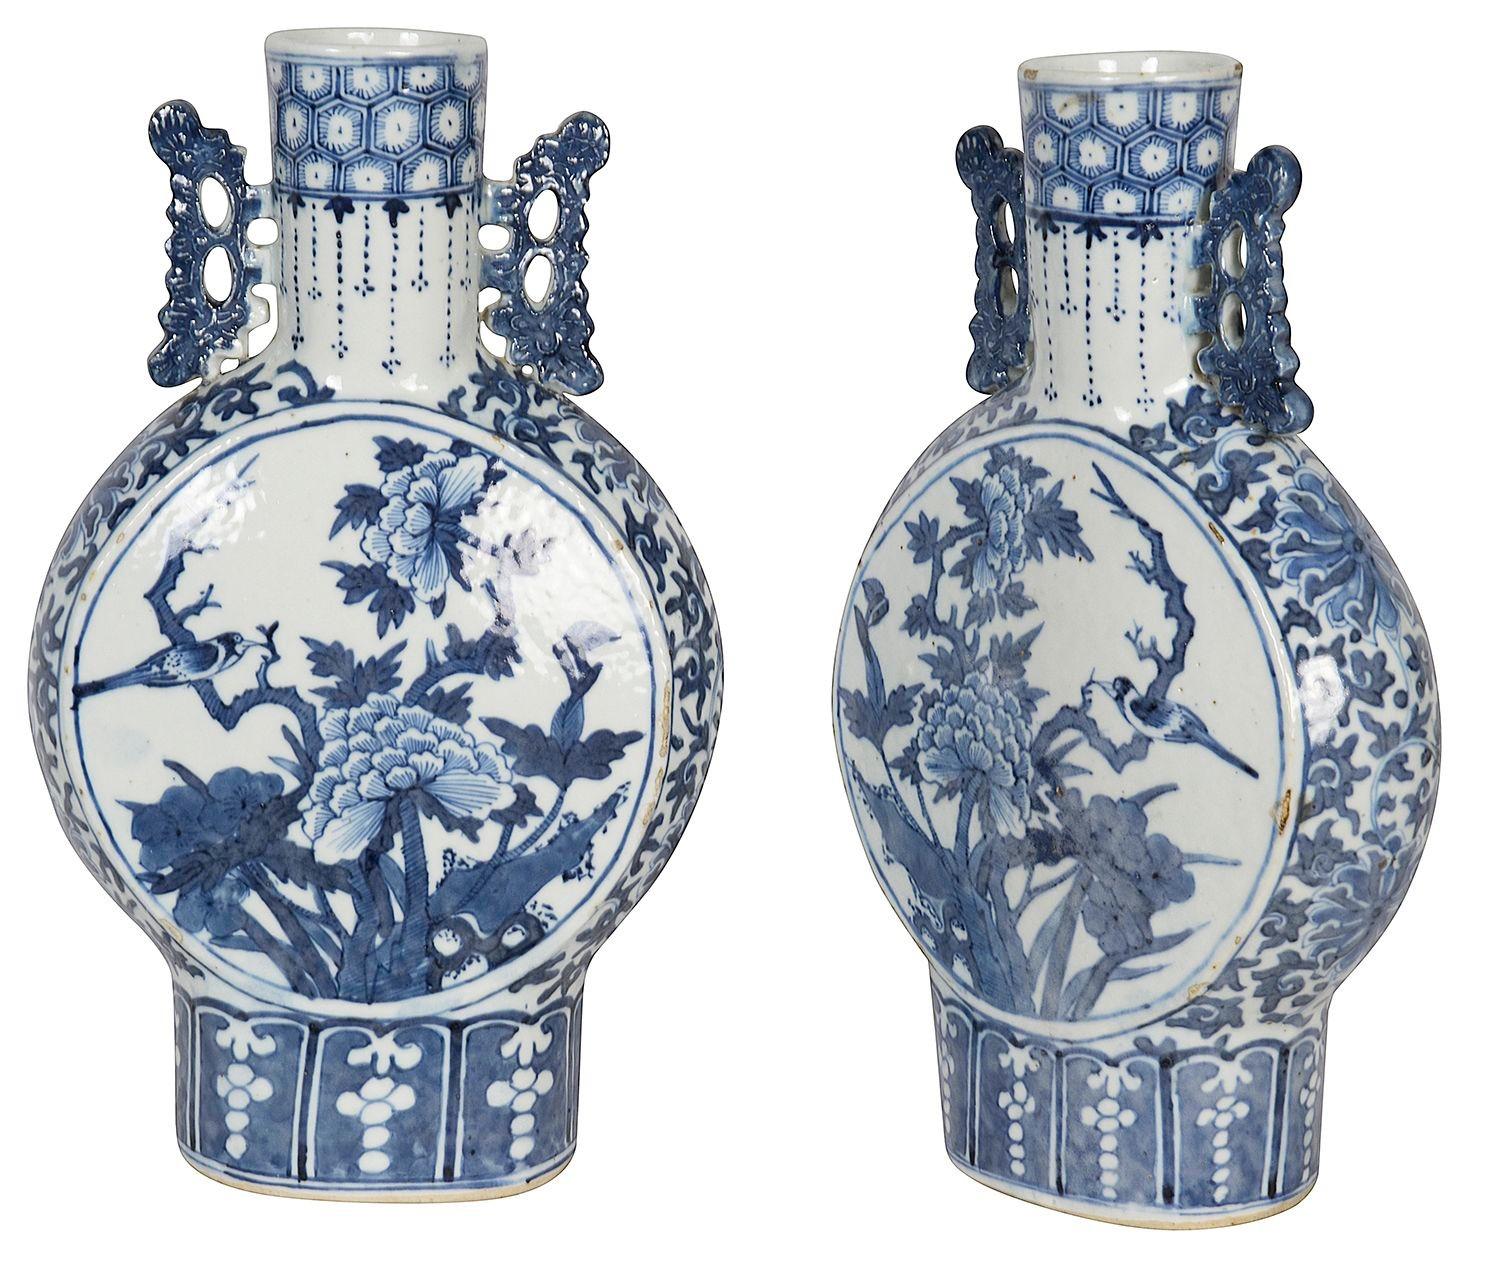 Pair 19th Century Chinese Blue and White Moon flasks, each with classical motif decoration to the neckband bases, pierced handles on either side, inset hand painted circular panels depicting exotic floral scenes with a bird perched on a